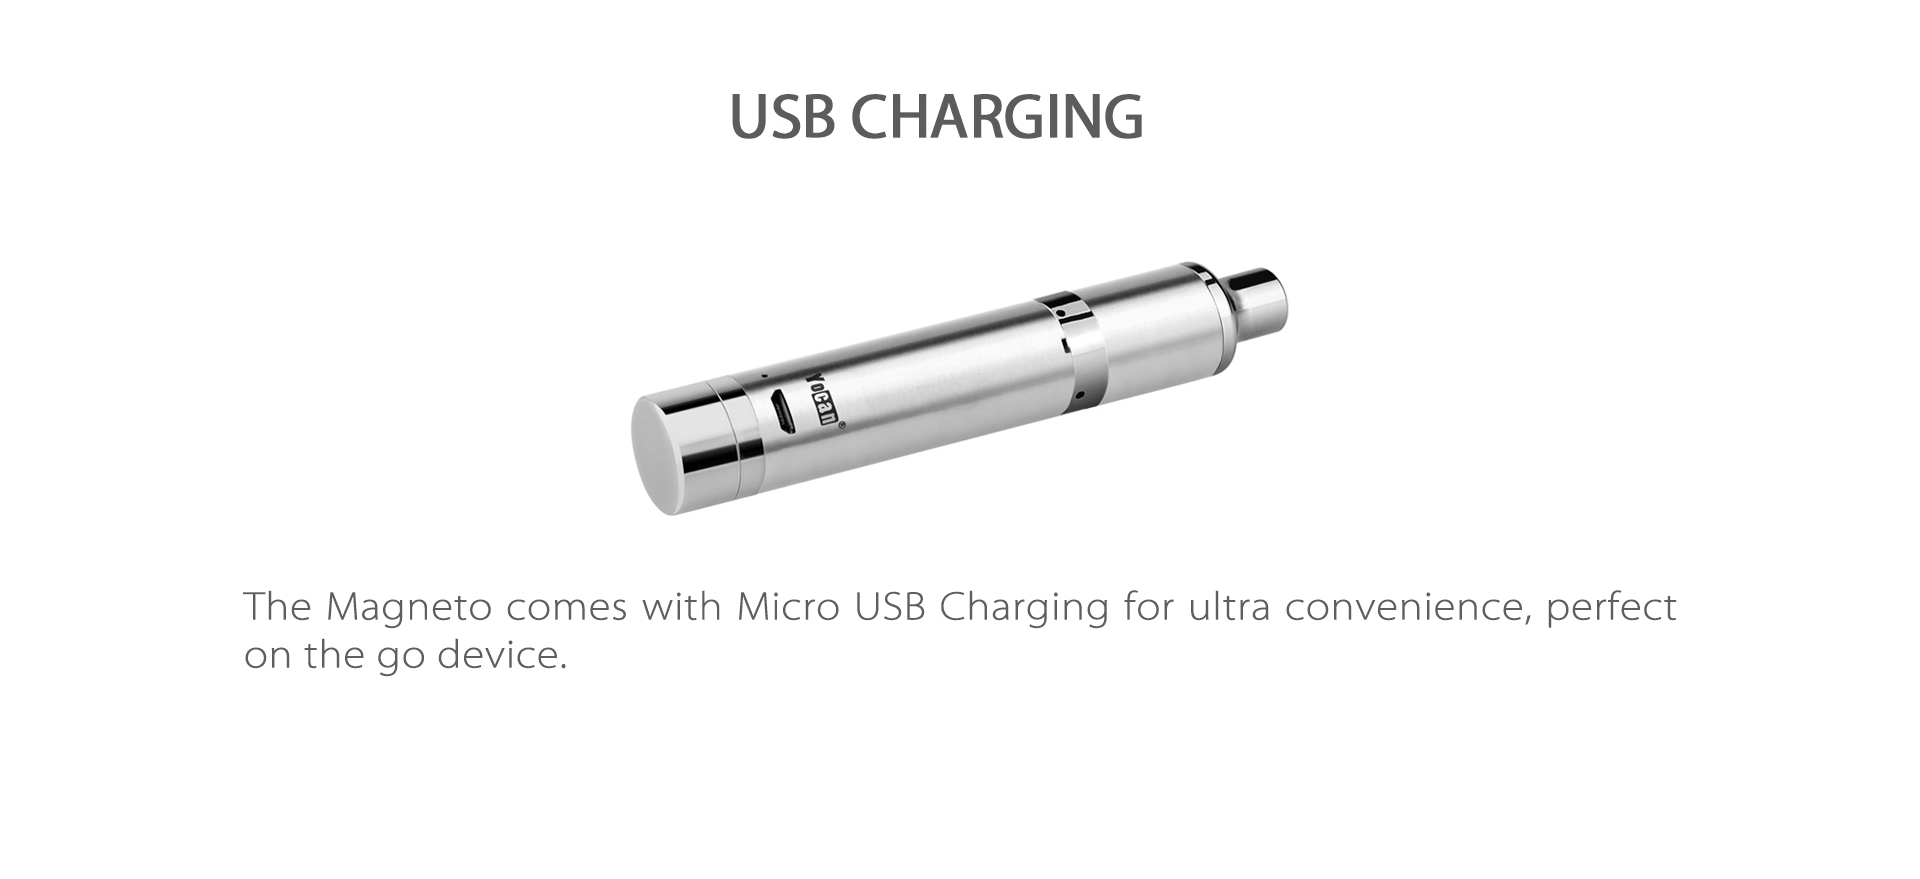 Yocan Magneto concentrate vaporizer pen 2020 version use the micro usb cable to charge